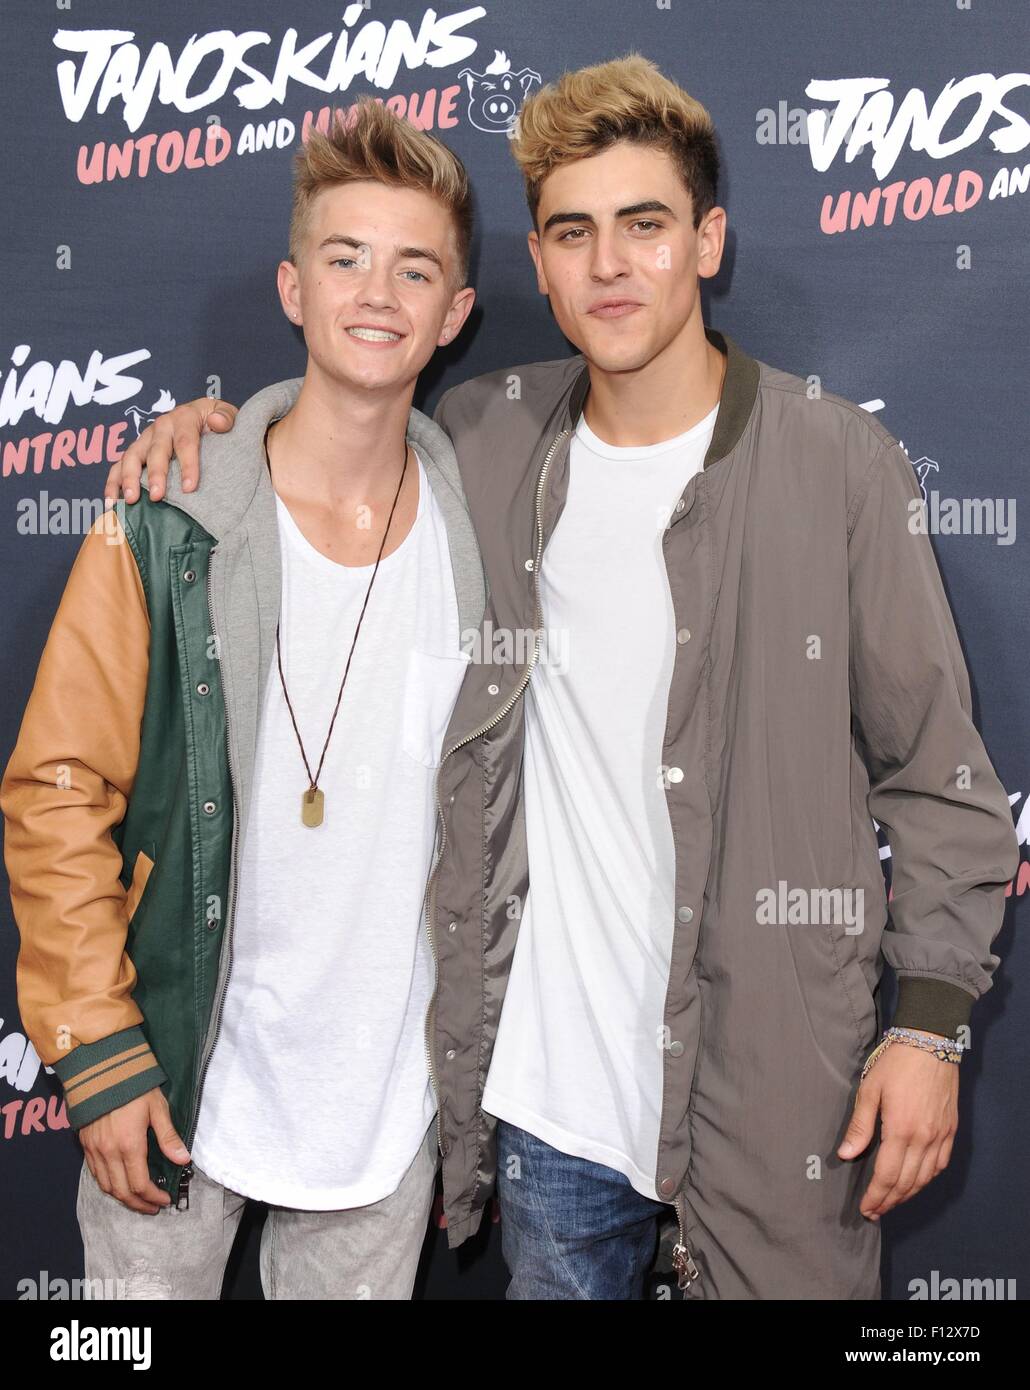 Jack johnson and jack gilinsky hi-res stock photography and images - Alamy